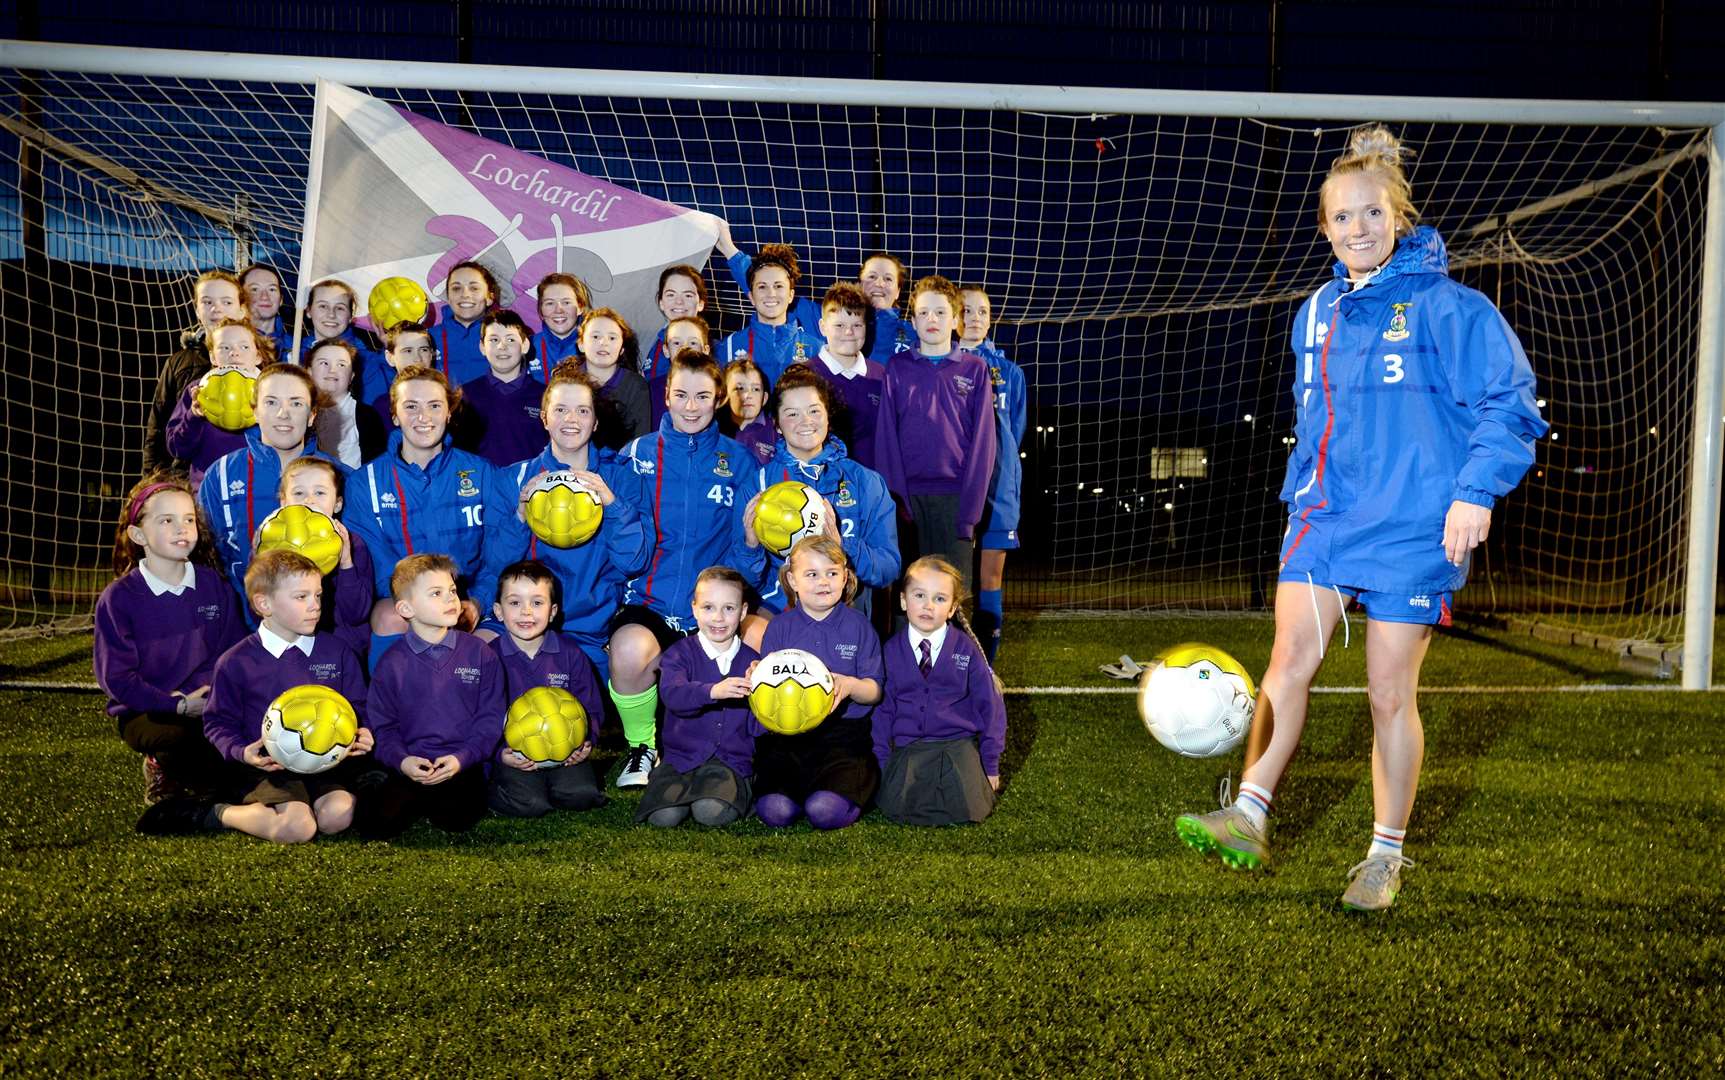 Inverness Caledonian Thistle Women's team received new Fair Trade footballs from the Lochardil pupil learning council. Player Julia Scott tries out one of the new Bala brand balls. Picture: Gair Fraser. Image No. 043595